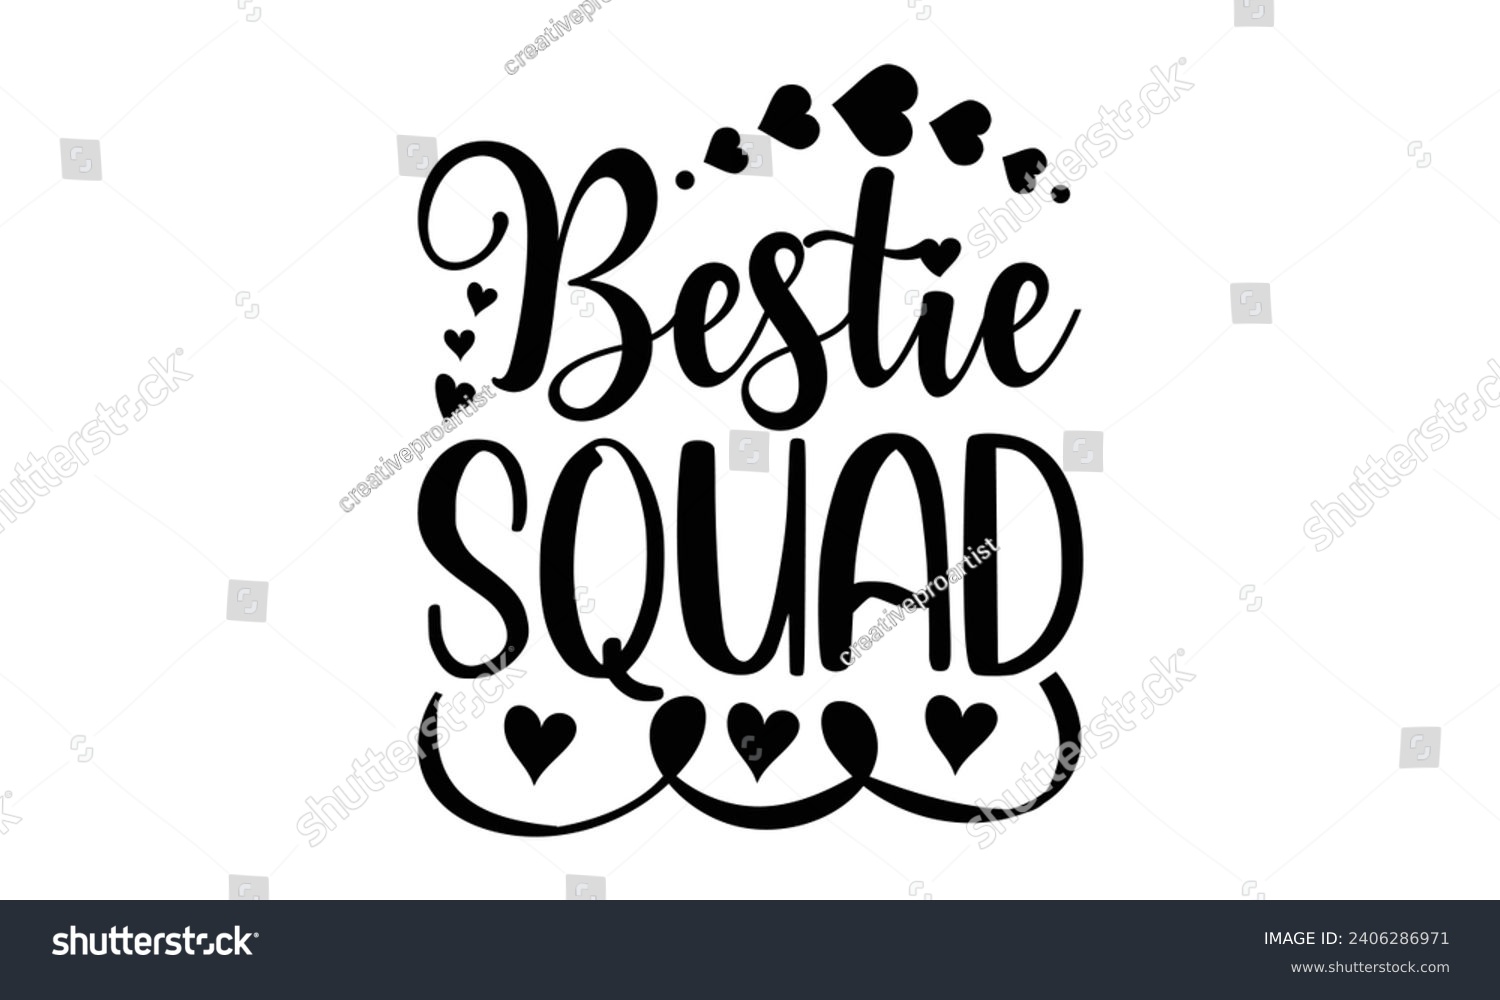 SVG of Bestie Squad- Best friends t- shirt design, Hand drawn vintage illustration with hand-lettering and decoration elements, greeting card template with typography text svg